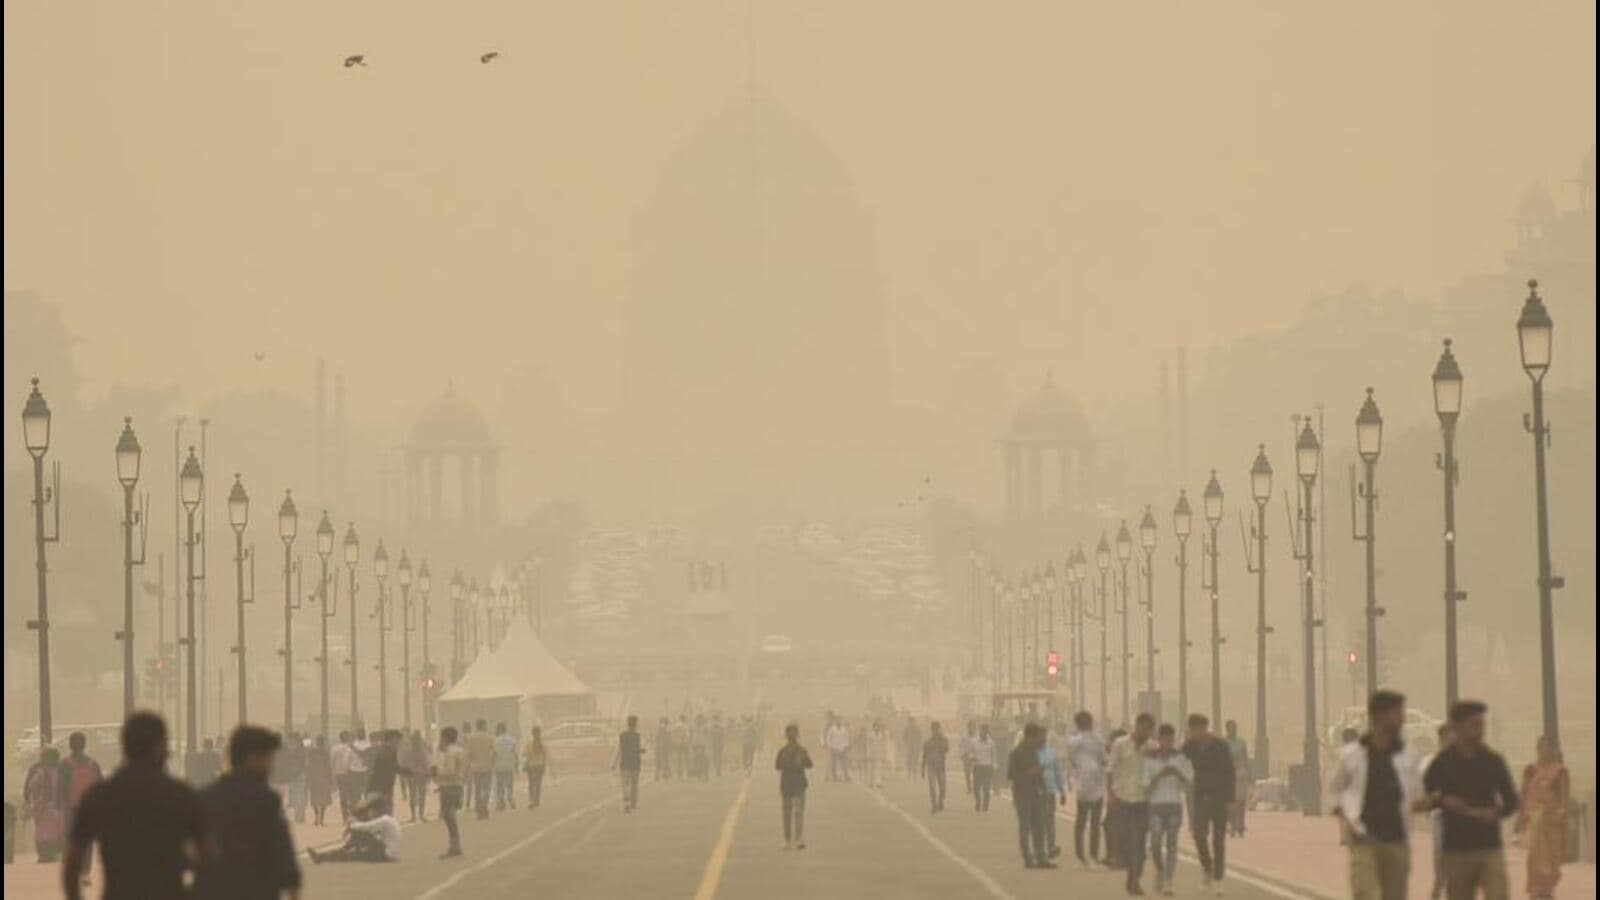 Delhis Pollution Levels Can Have Lasting Health Effects Latest News India Hindustan Times 0542